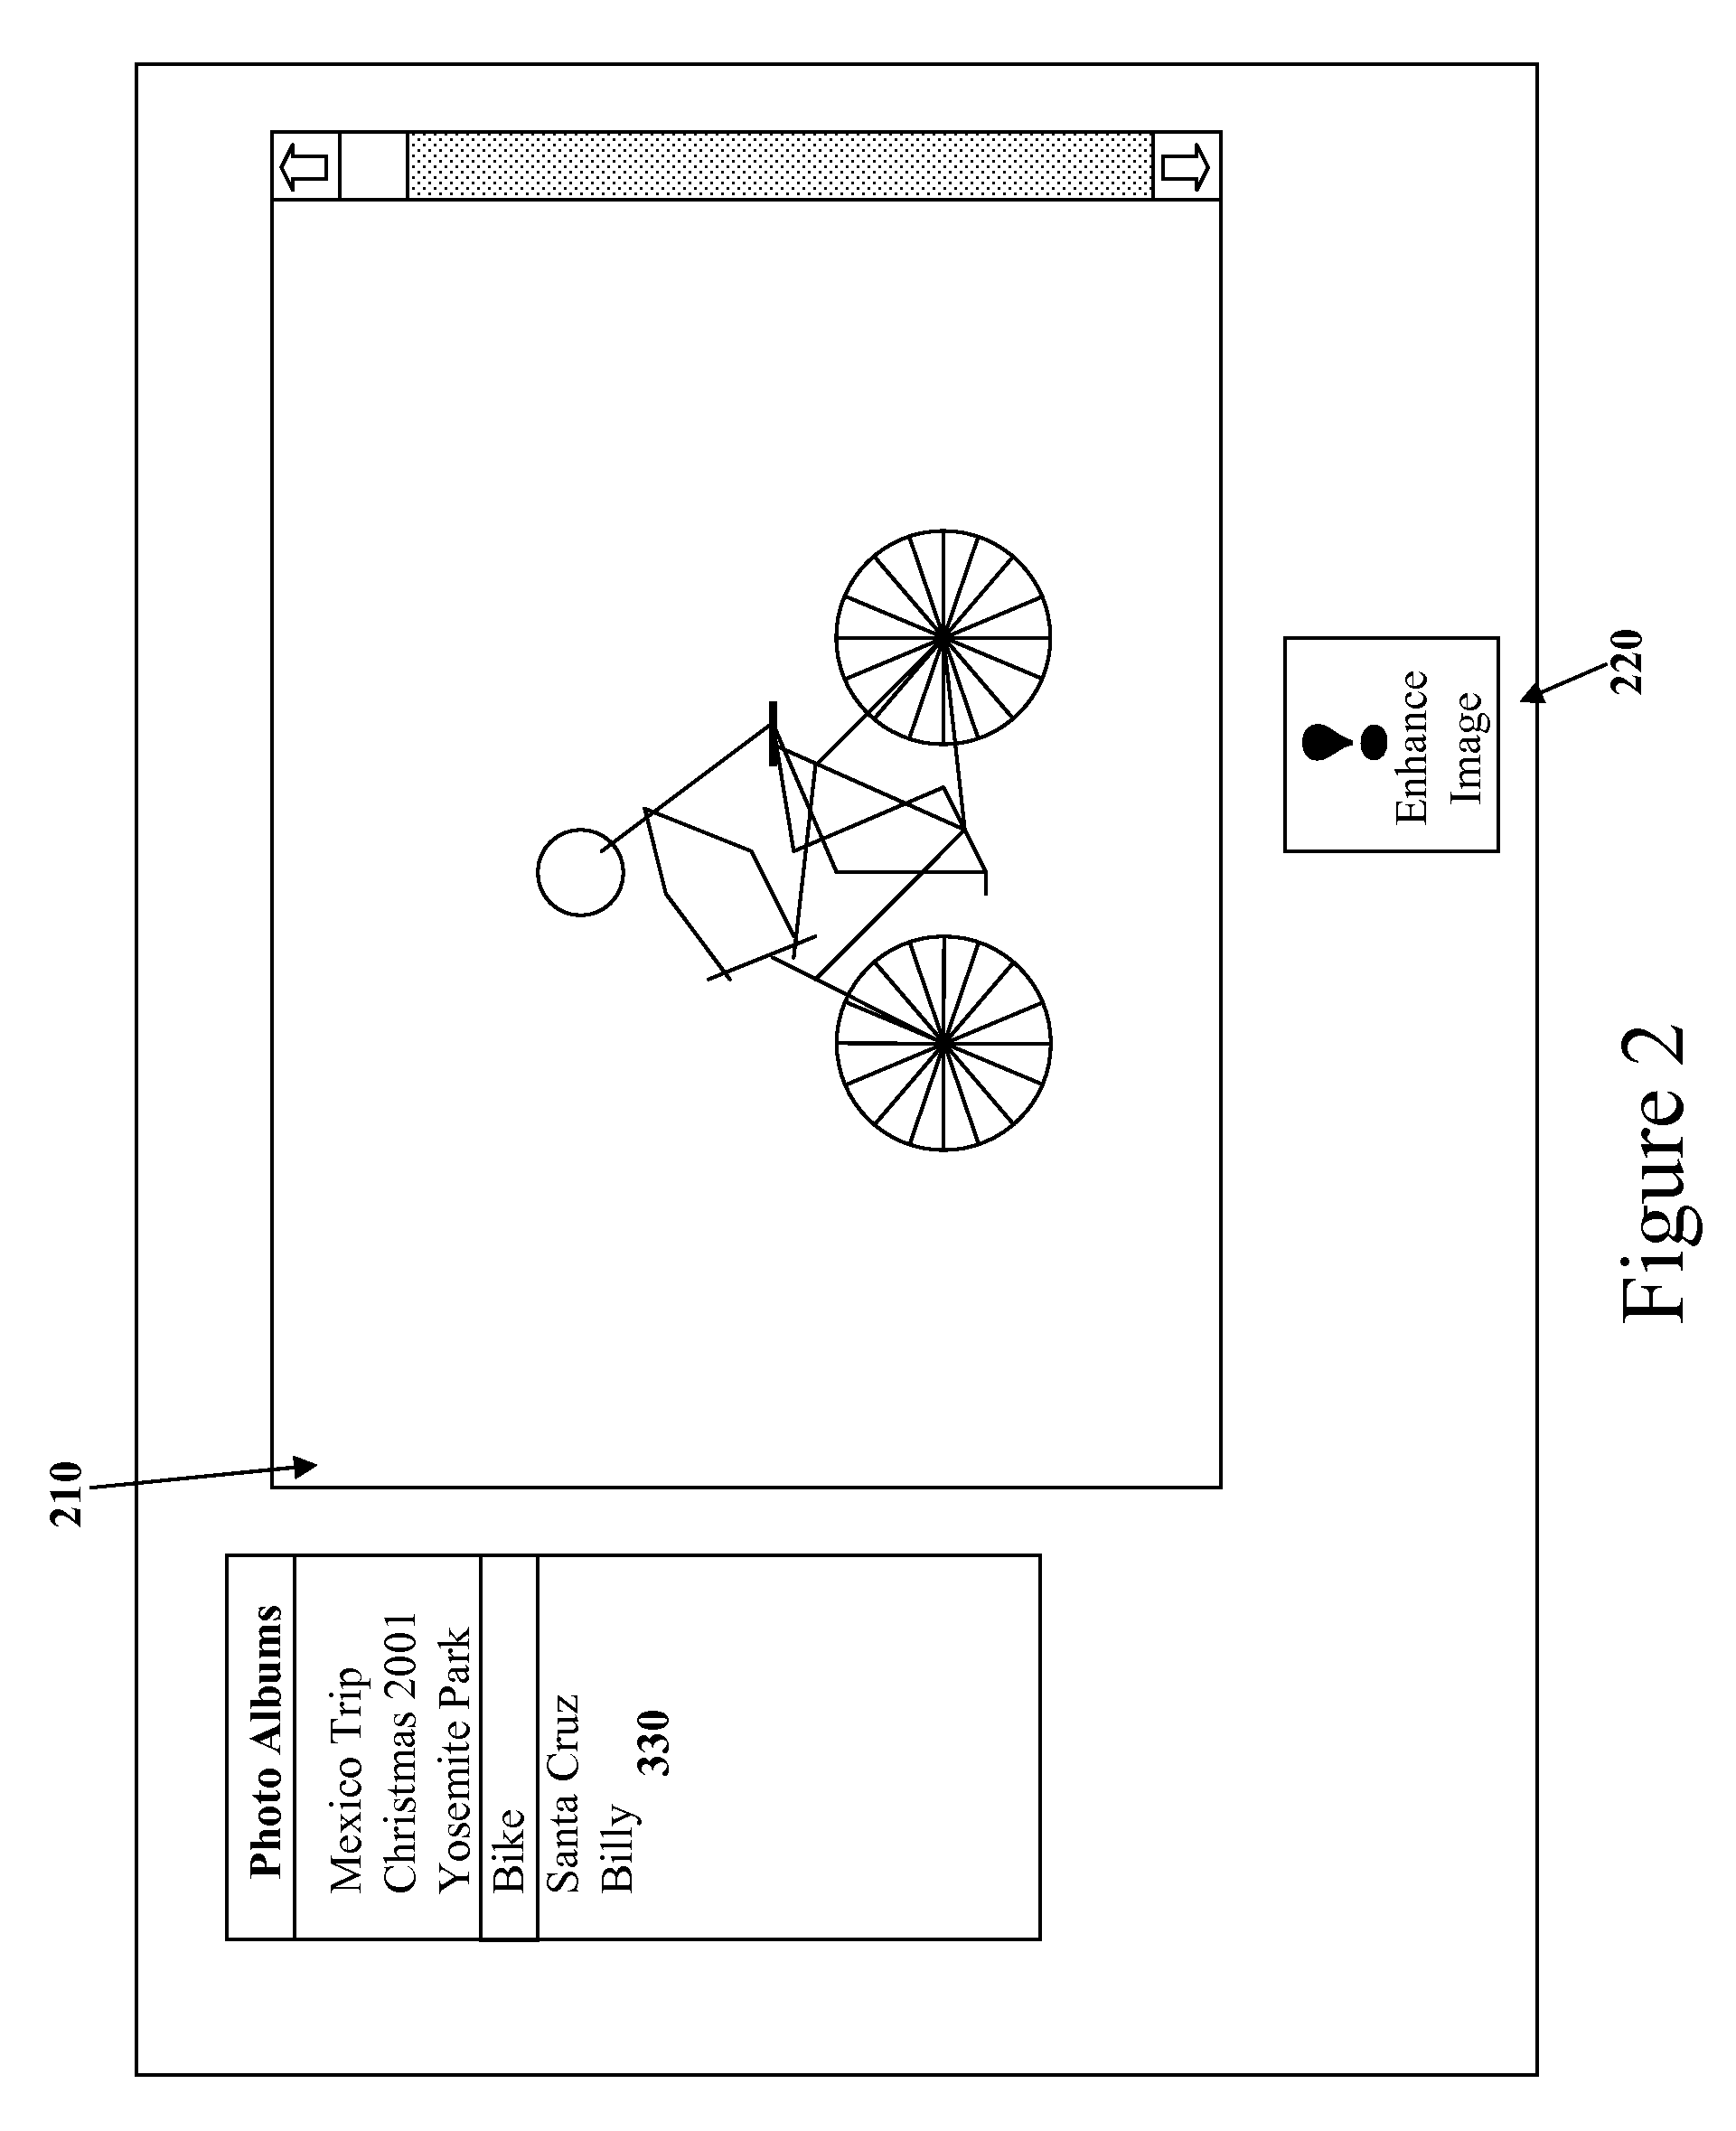 Method and Apparatus for An Intuitive Digital Image Processing System That Enhances Digital Images